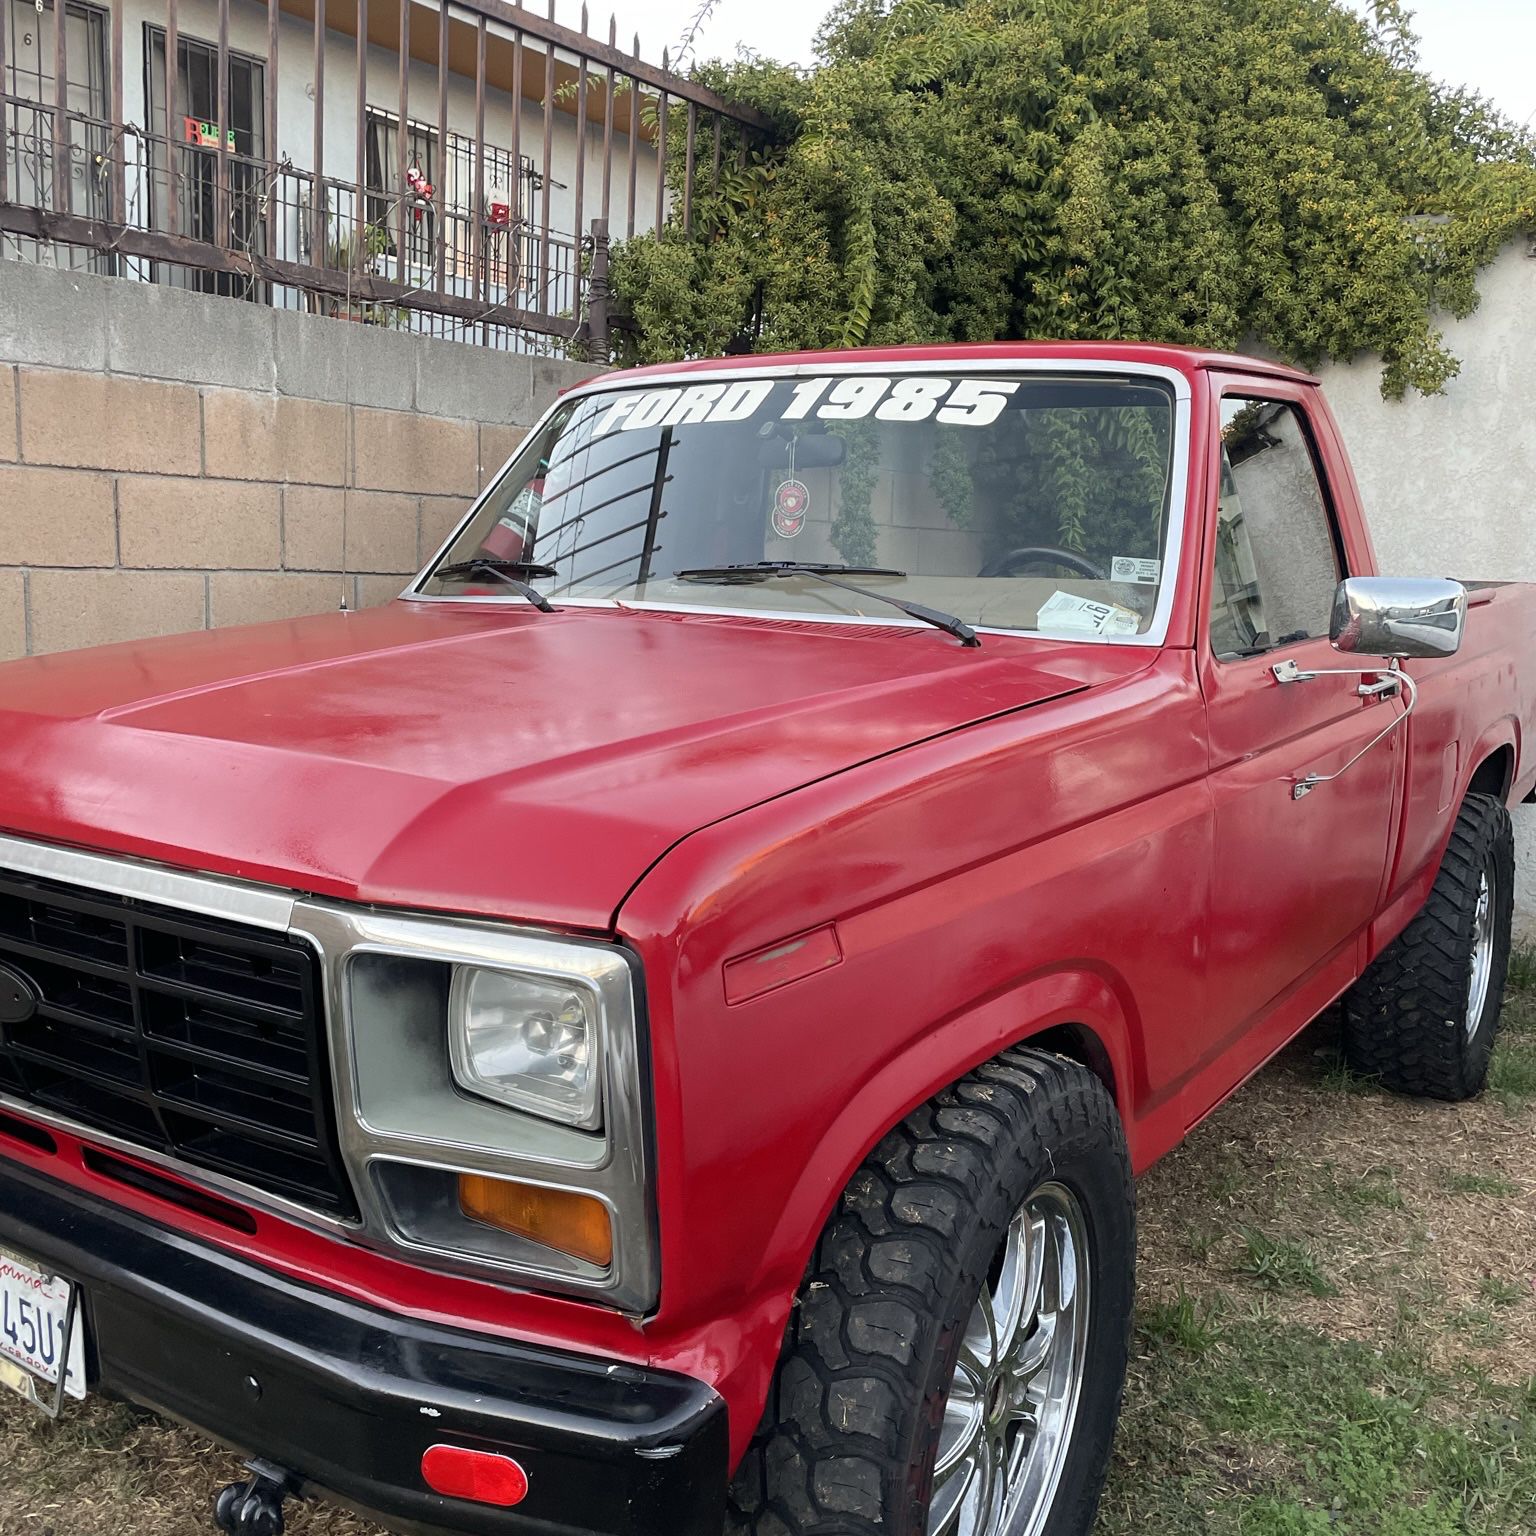 1985 Ford F-150